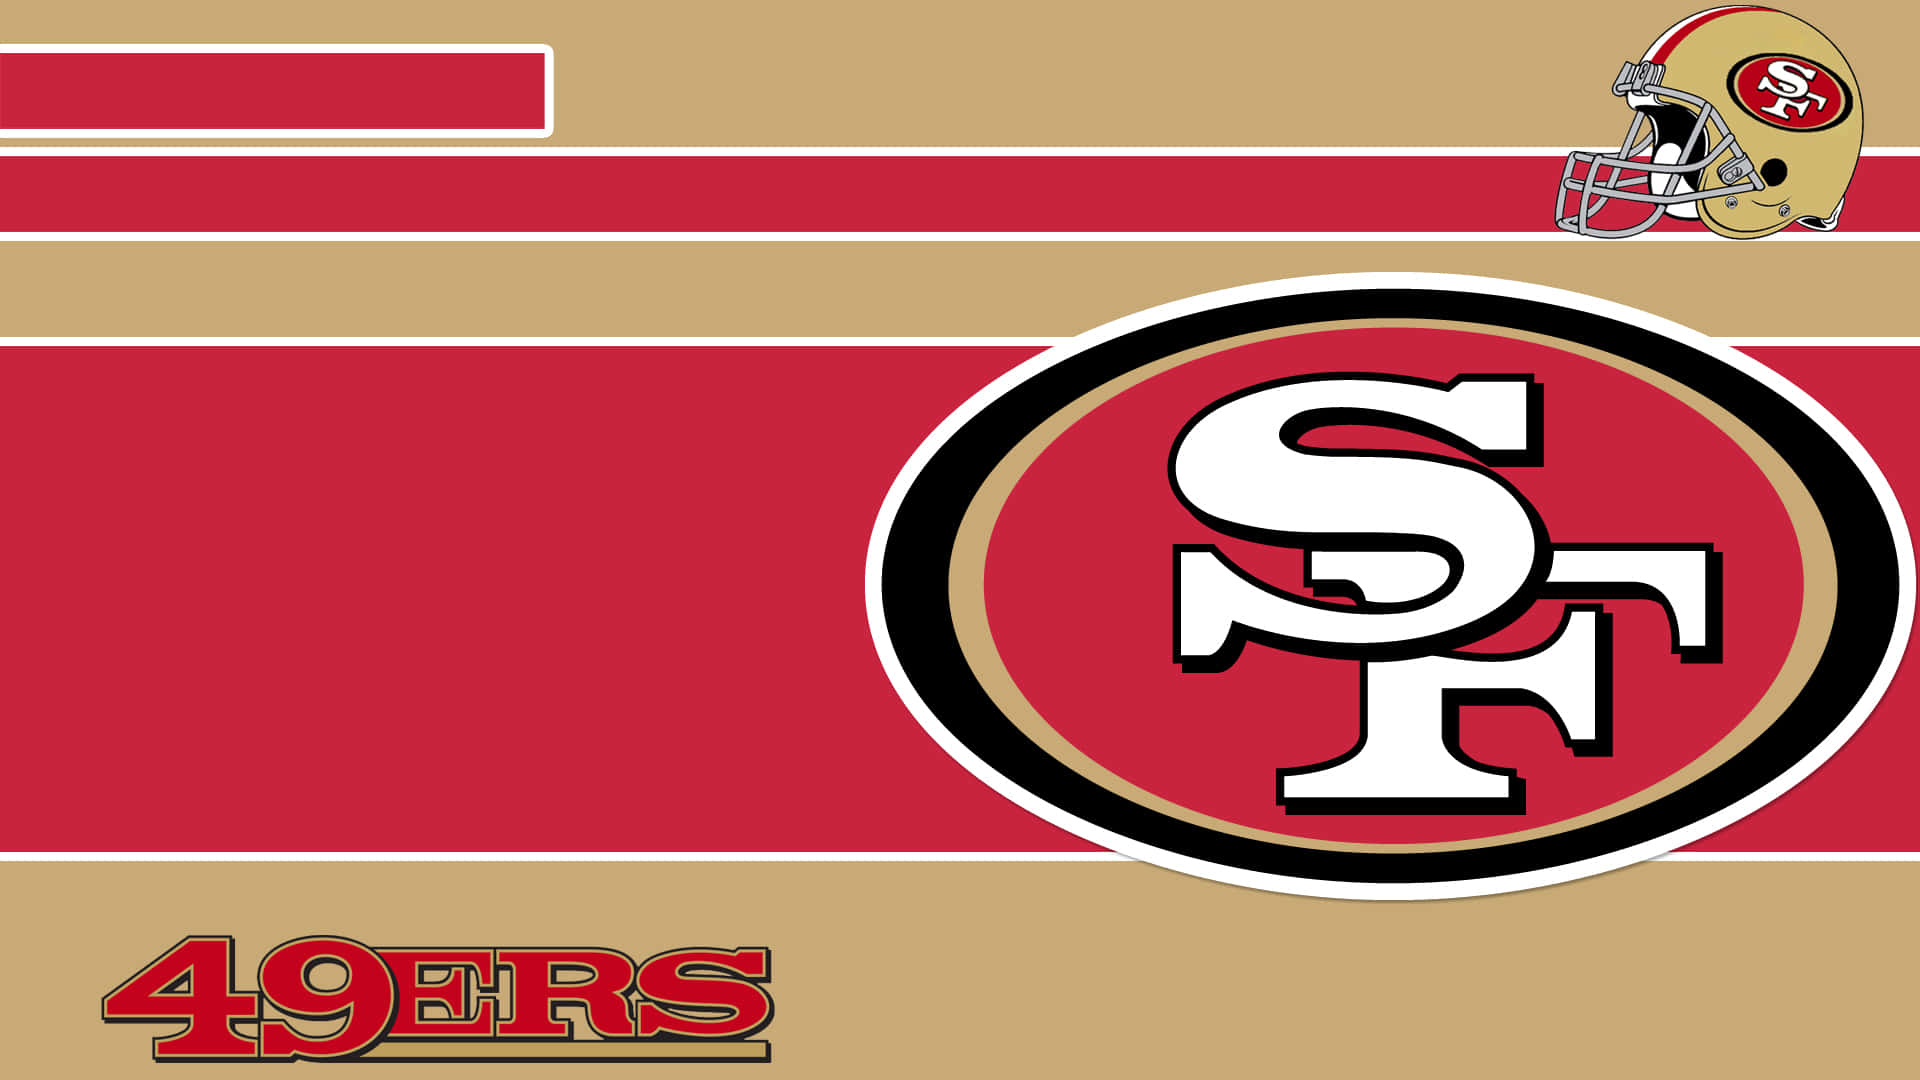 Representing 49ers spirit with team colors